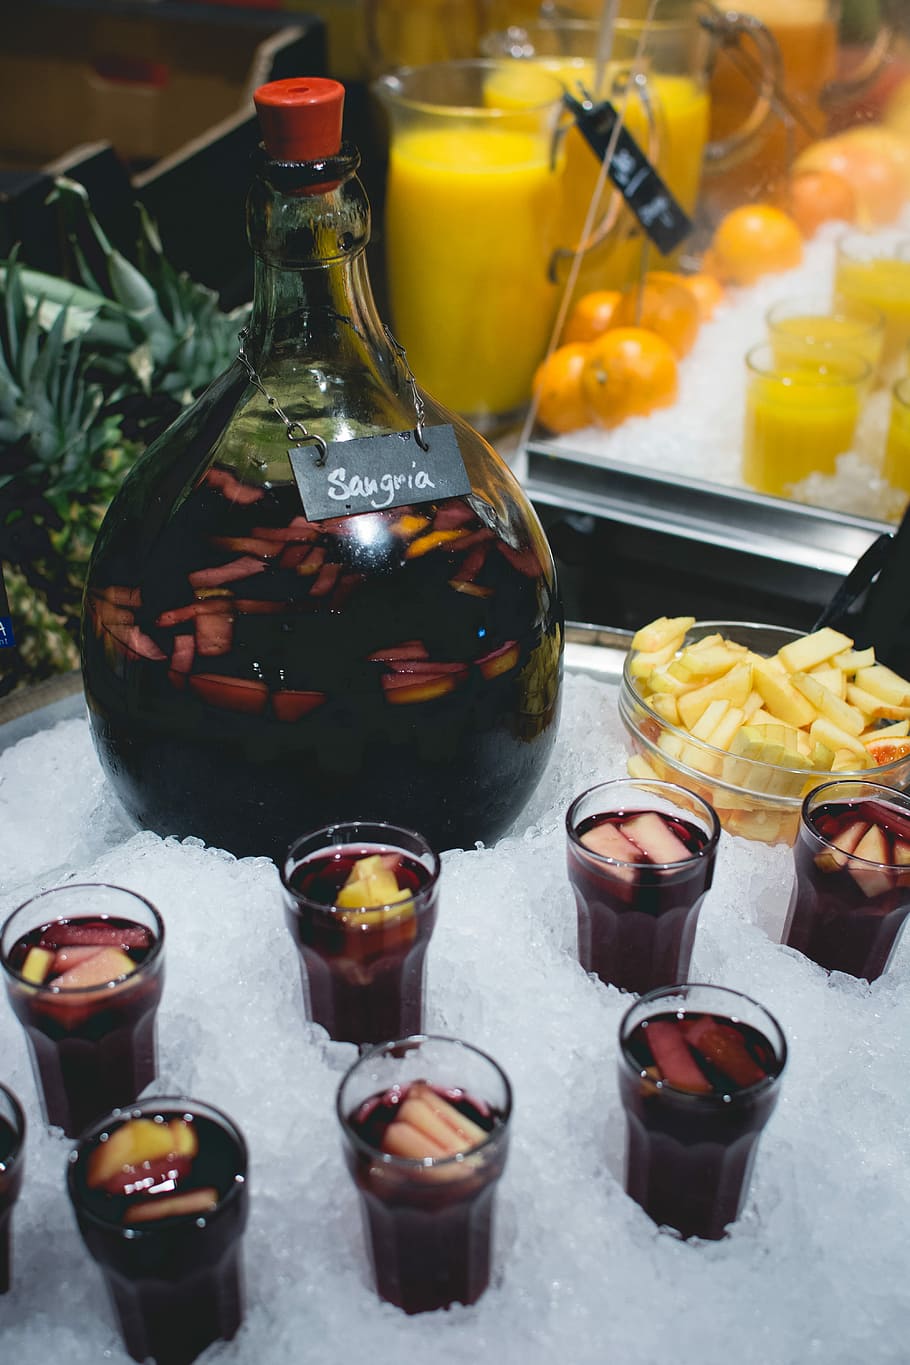 Ice cold Sangria in a cantine, drink, fruit, summer, wine, food